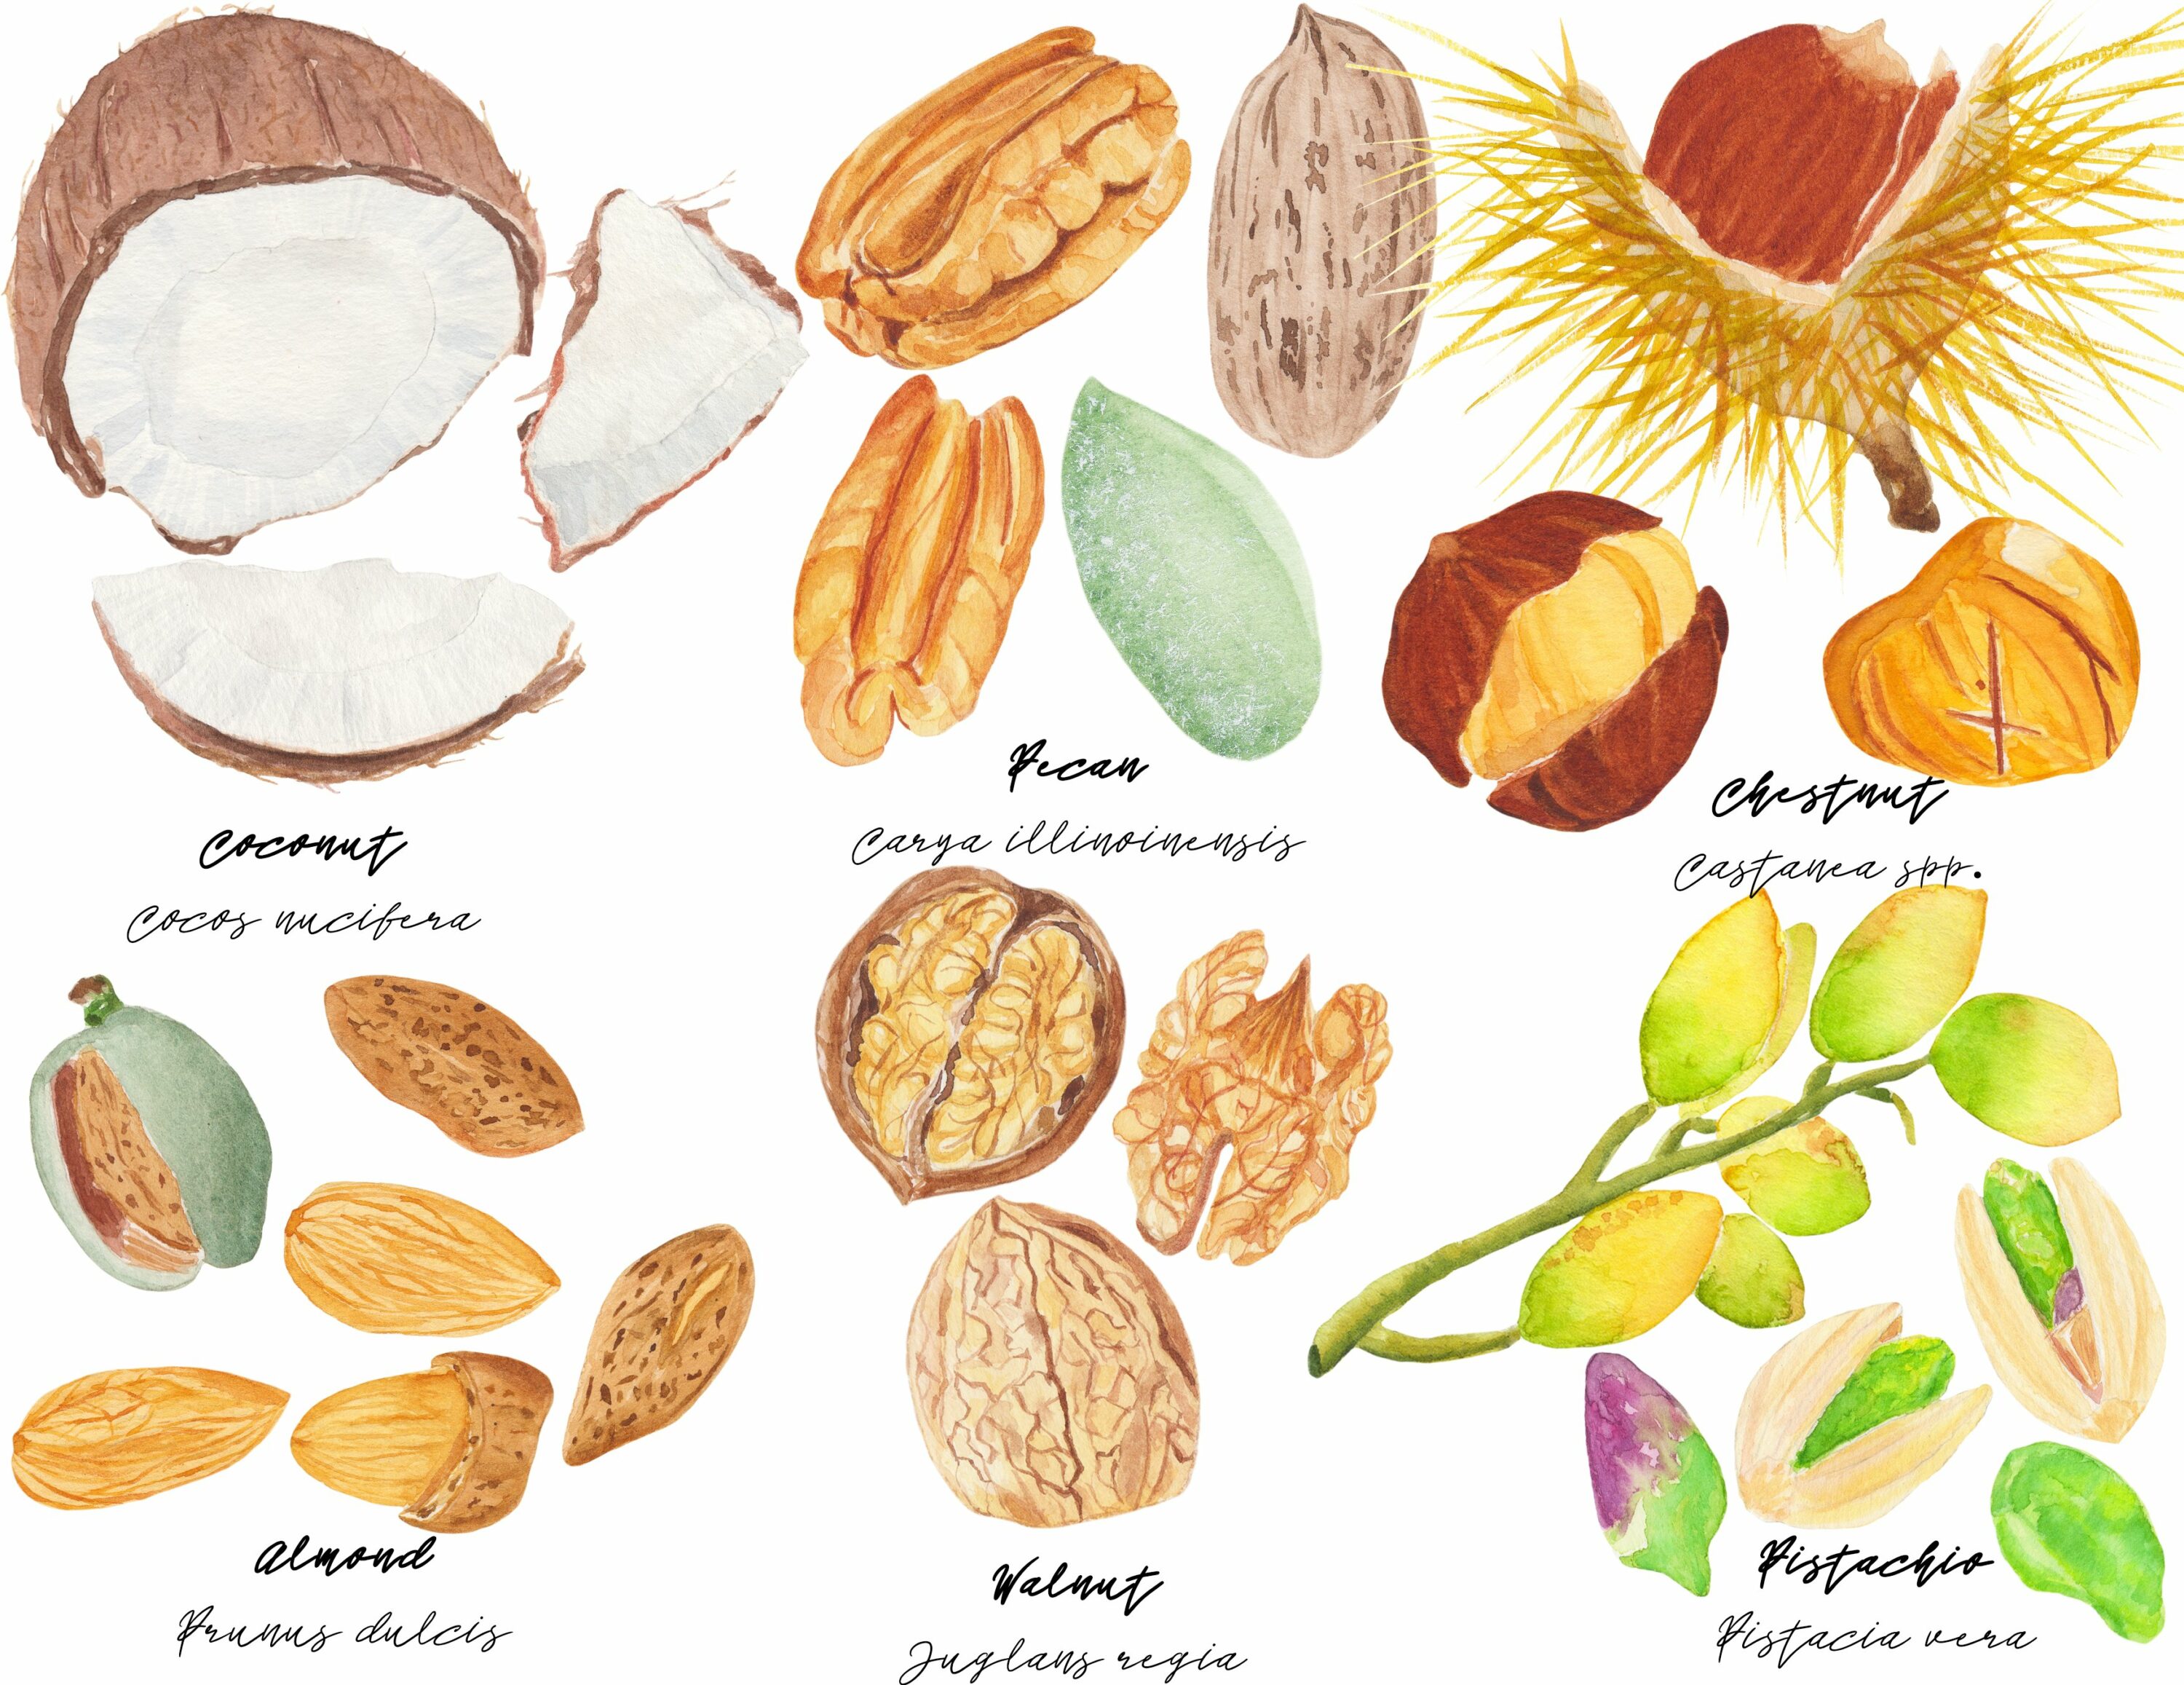 Pastel nuts in the different styles and from the different parts of the worlds.